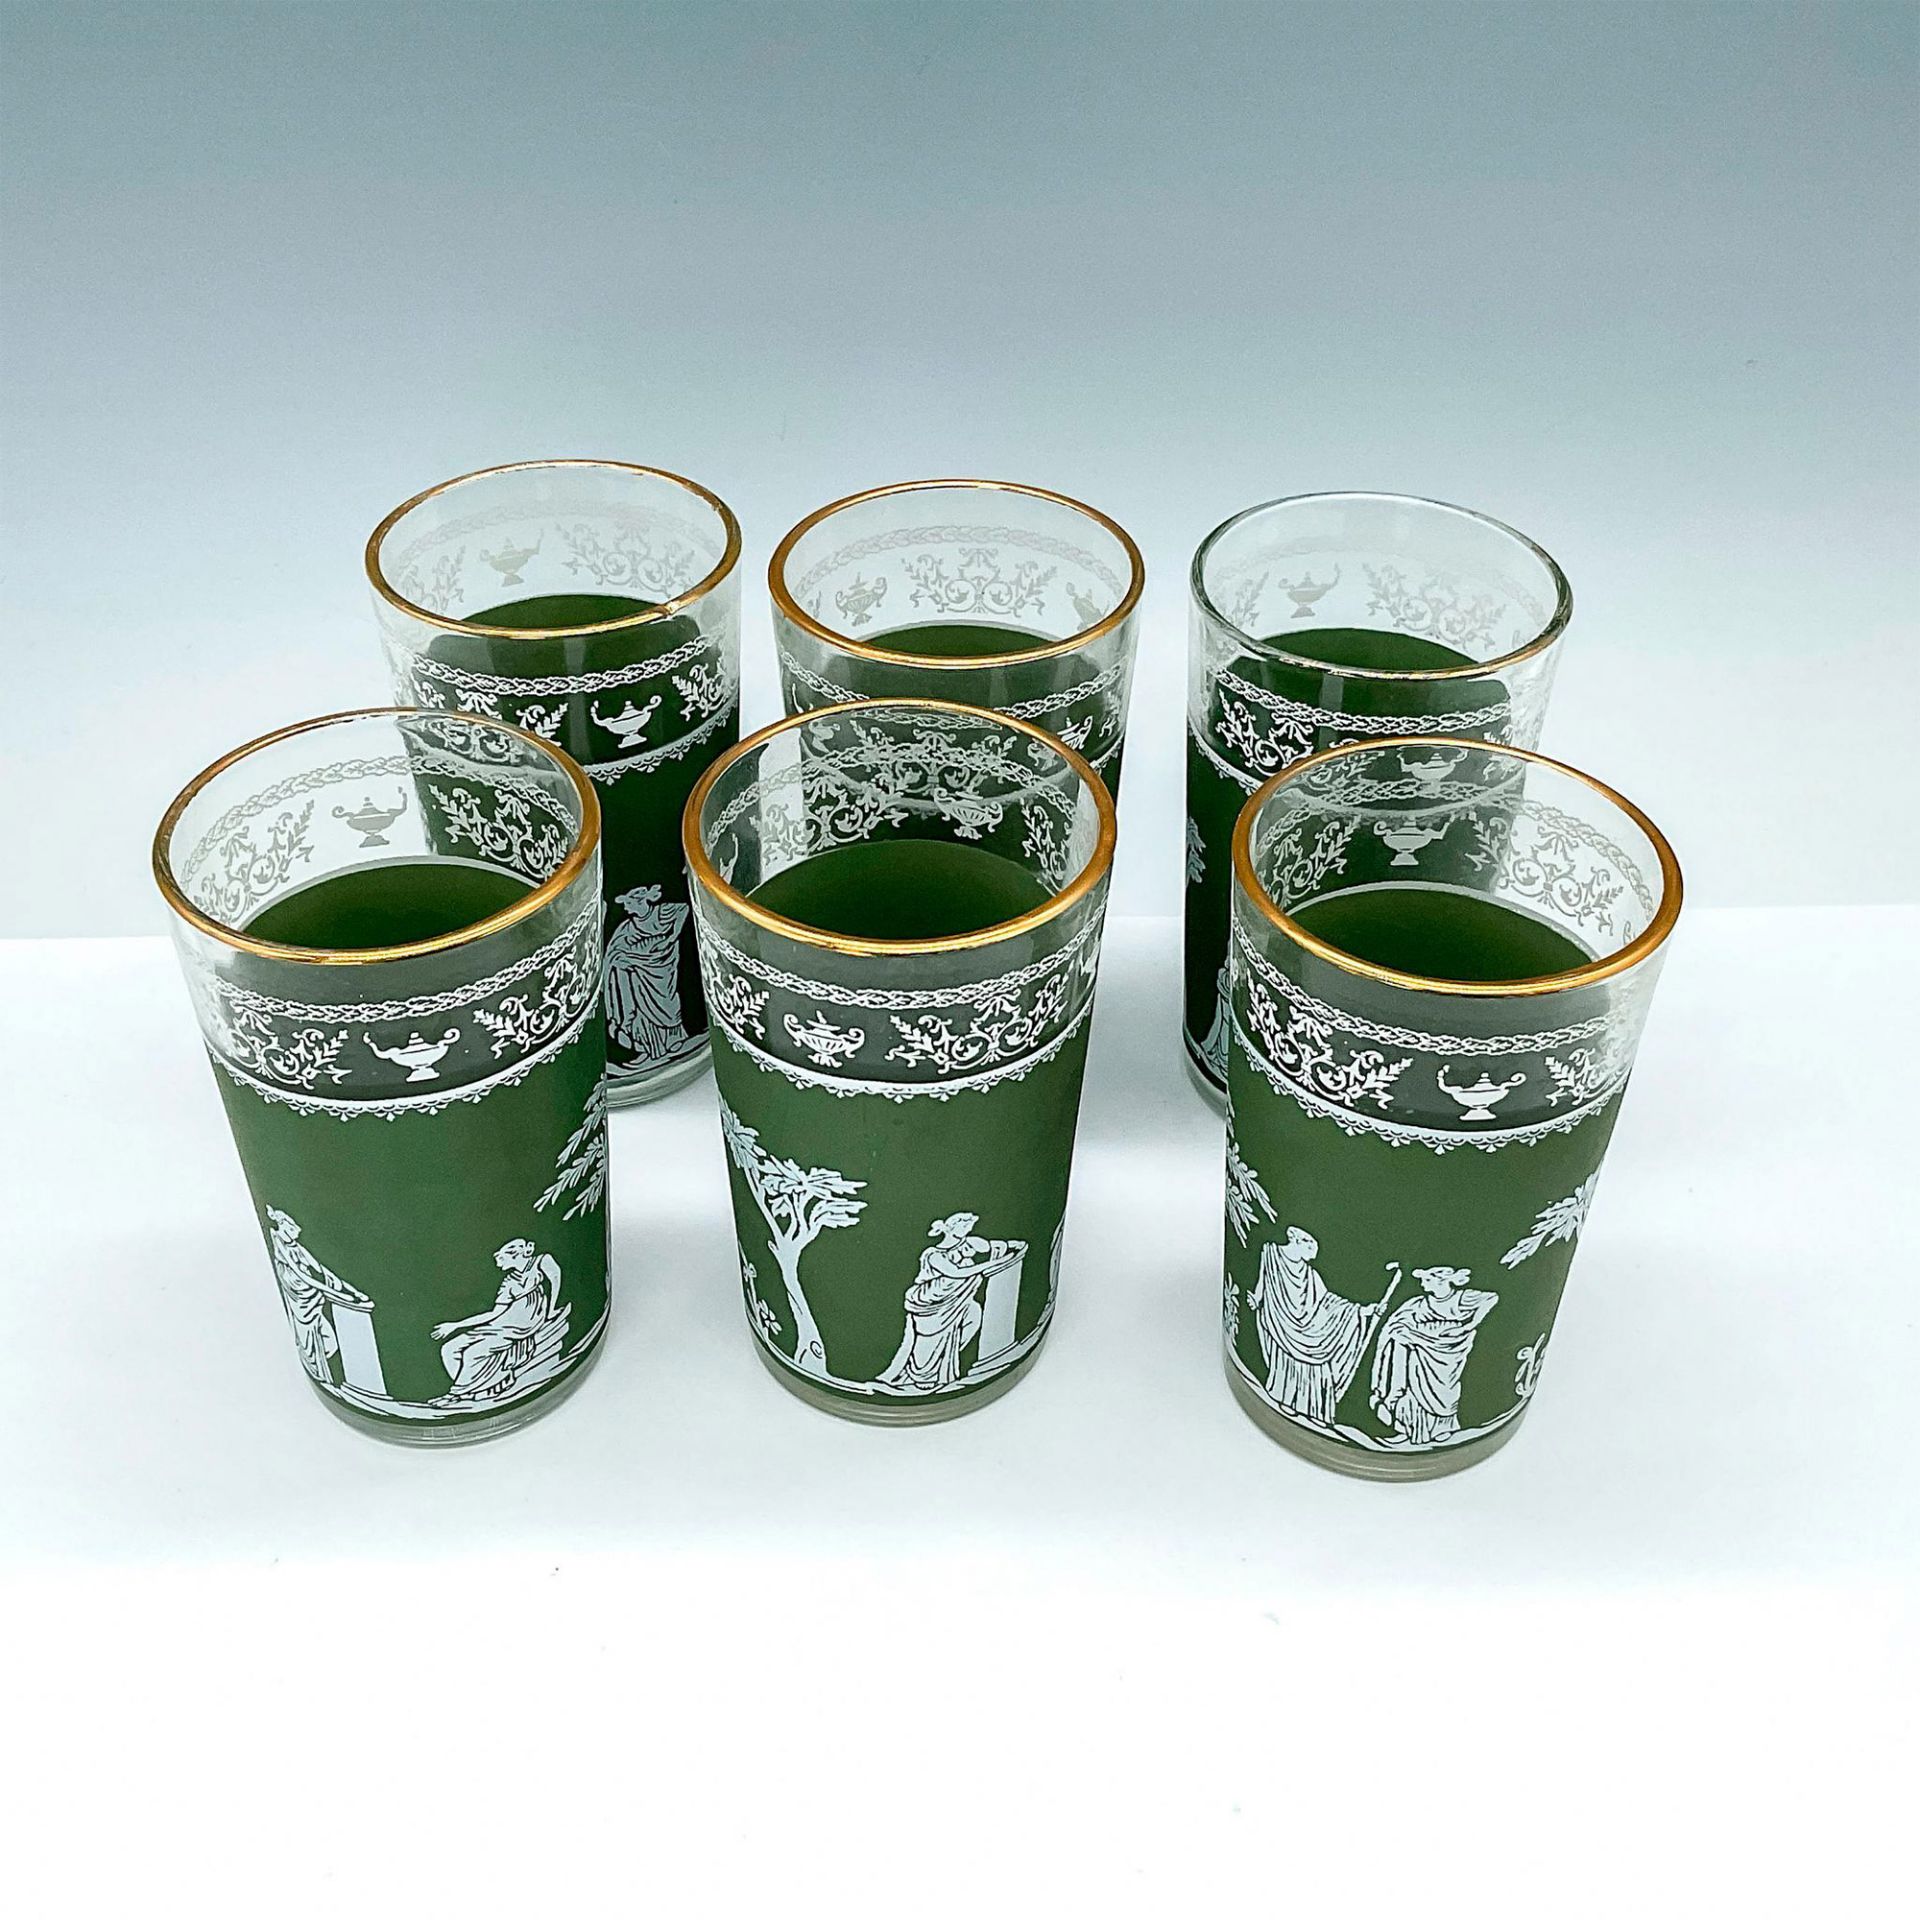 6pc Jeanette Juice Glasses, Hellenic Green - Image 2 of 3